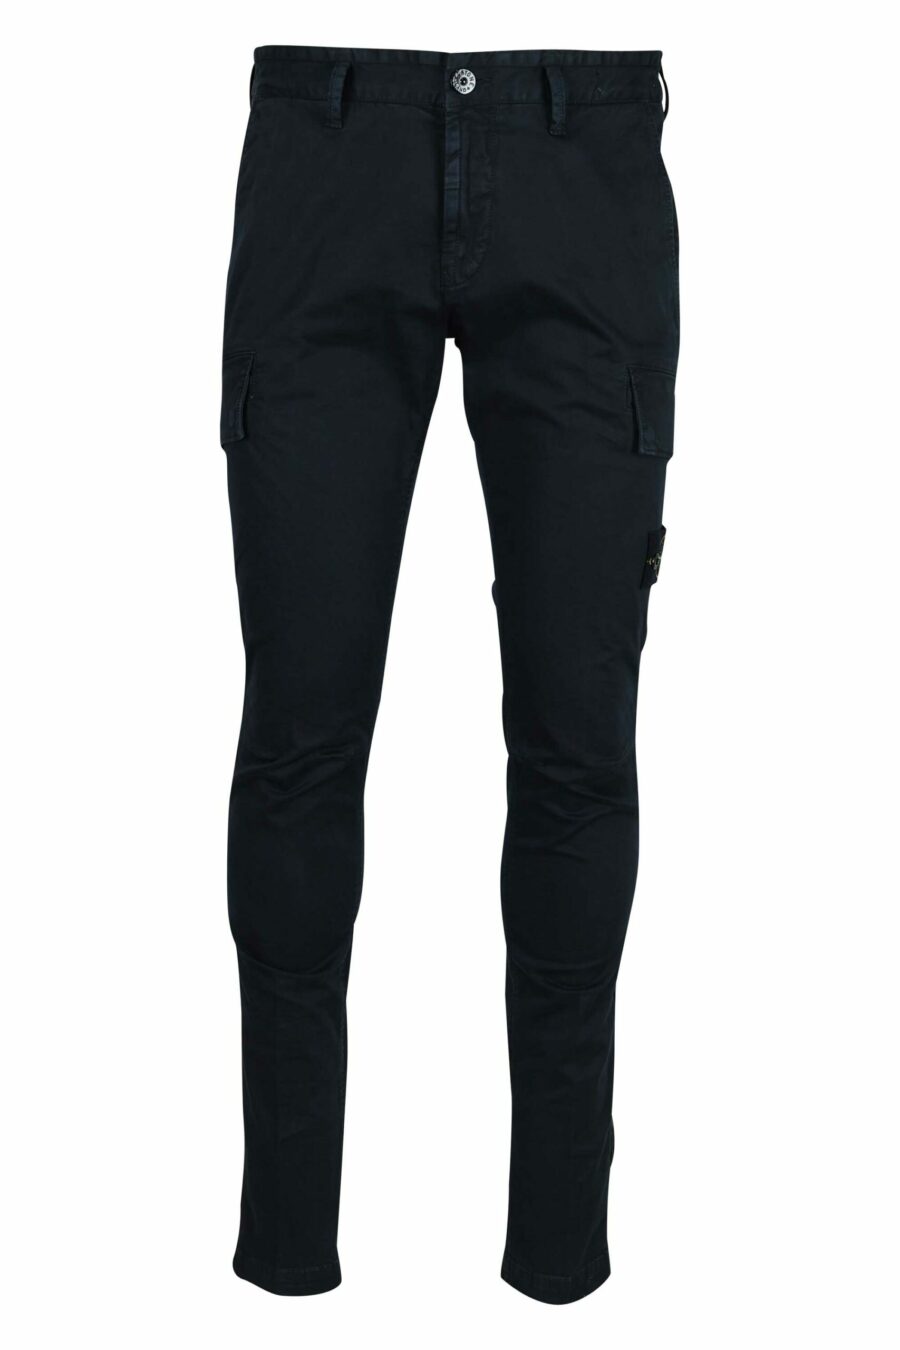 Dark blue skinny cargo cargo trousers with logo compass patch - 8052572938856 scaled